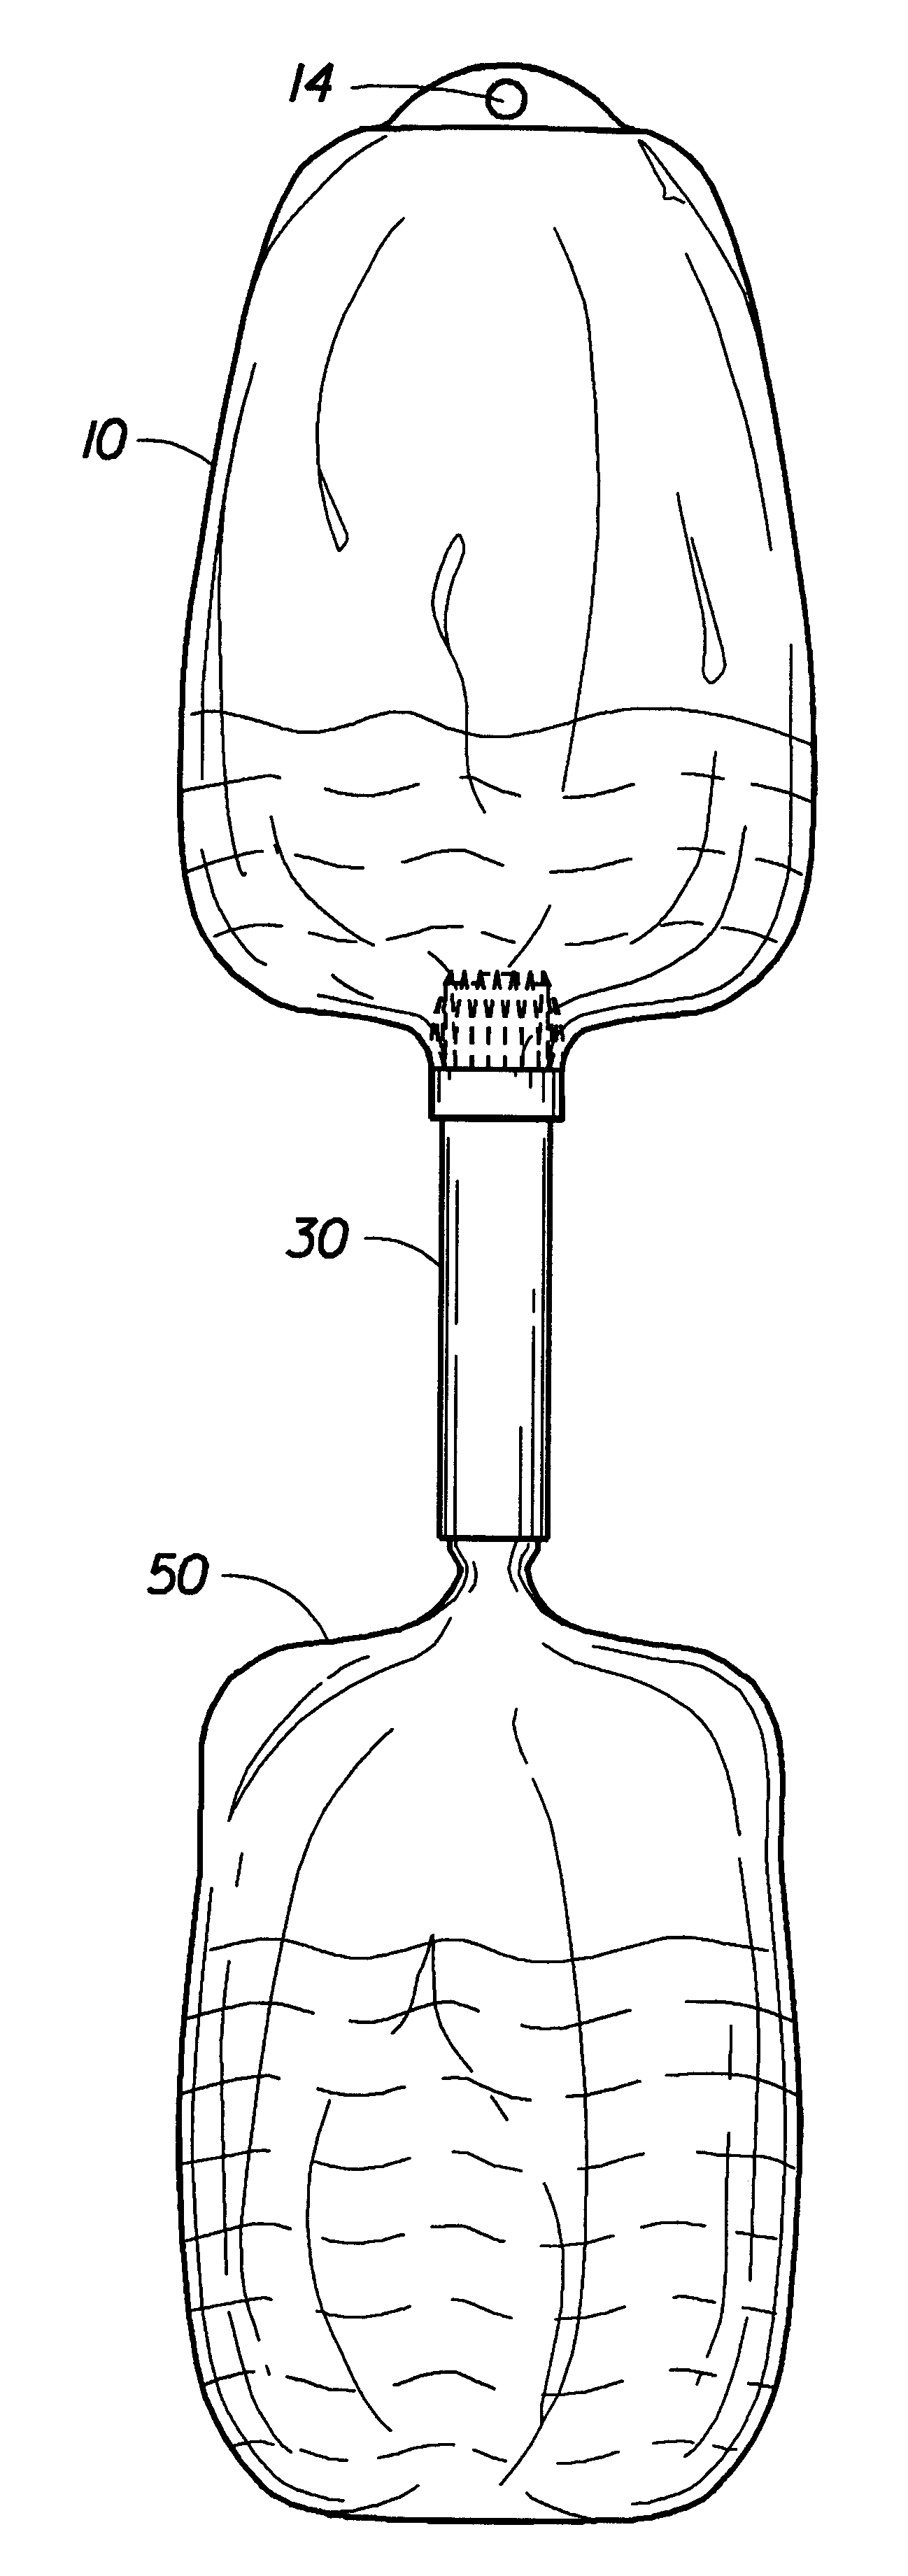 Emergency water treatment device